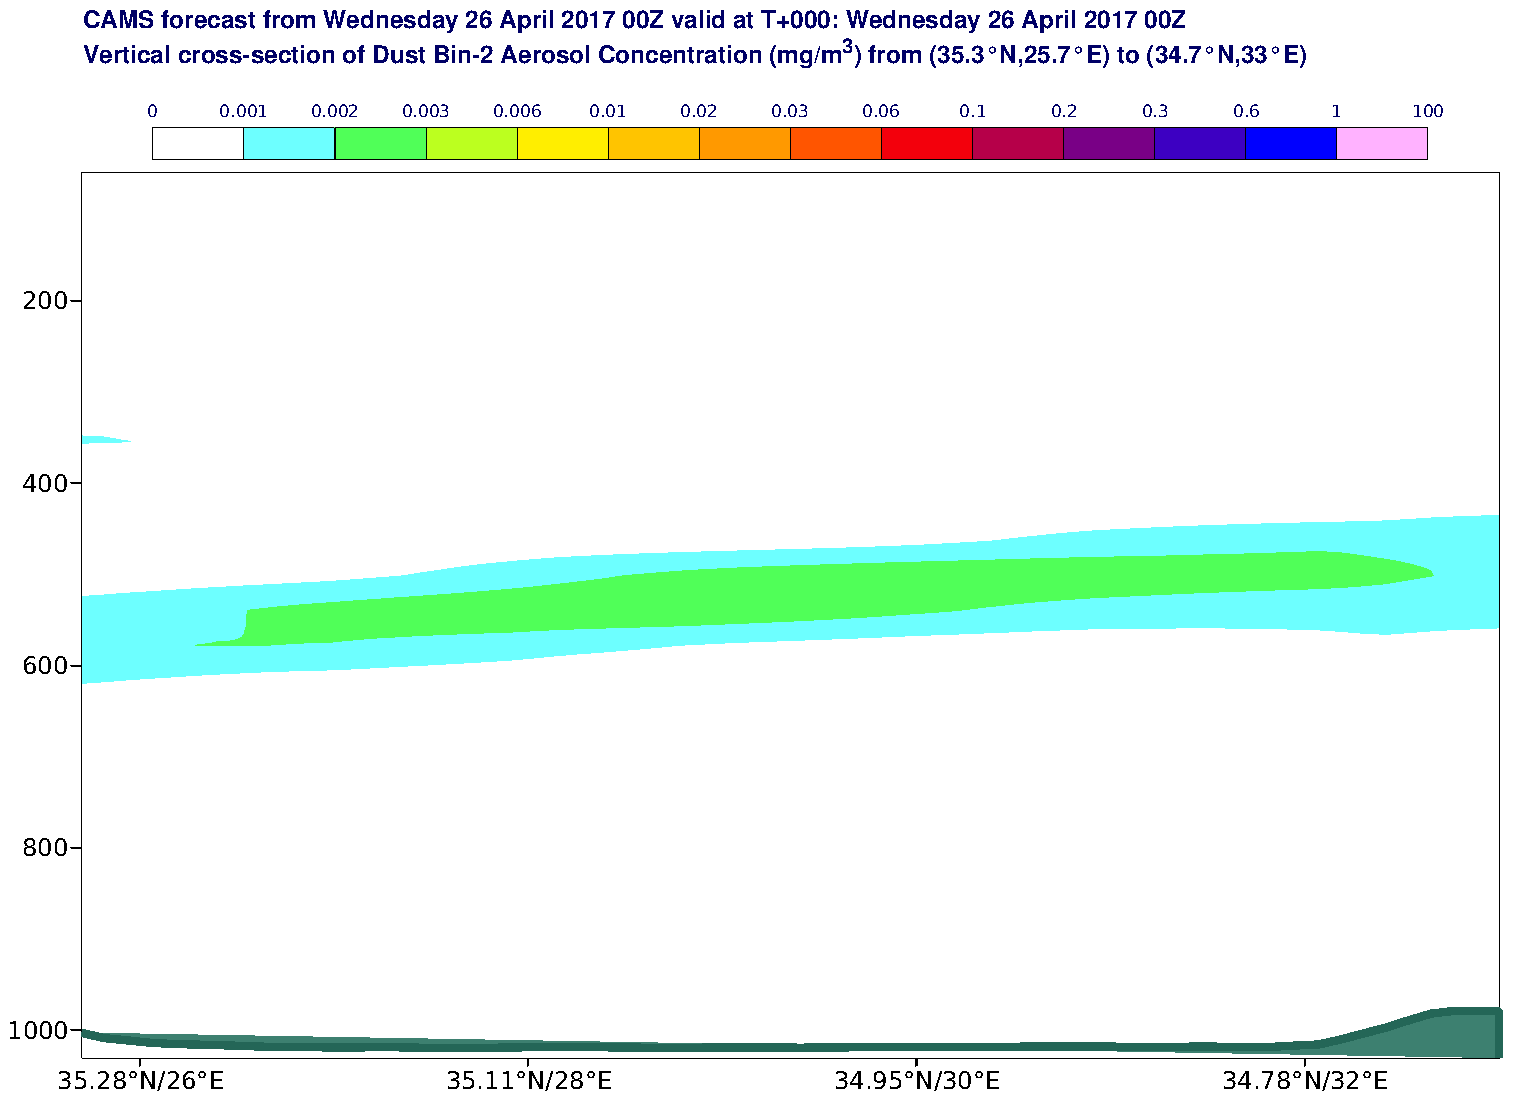 Vertical cross-section of Dust Bin-2 Aerosol Concentration (mg/m3) valid at T0 - 2017-04-26 00:00